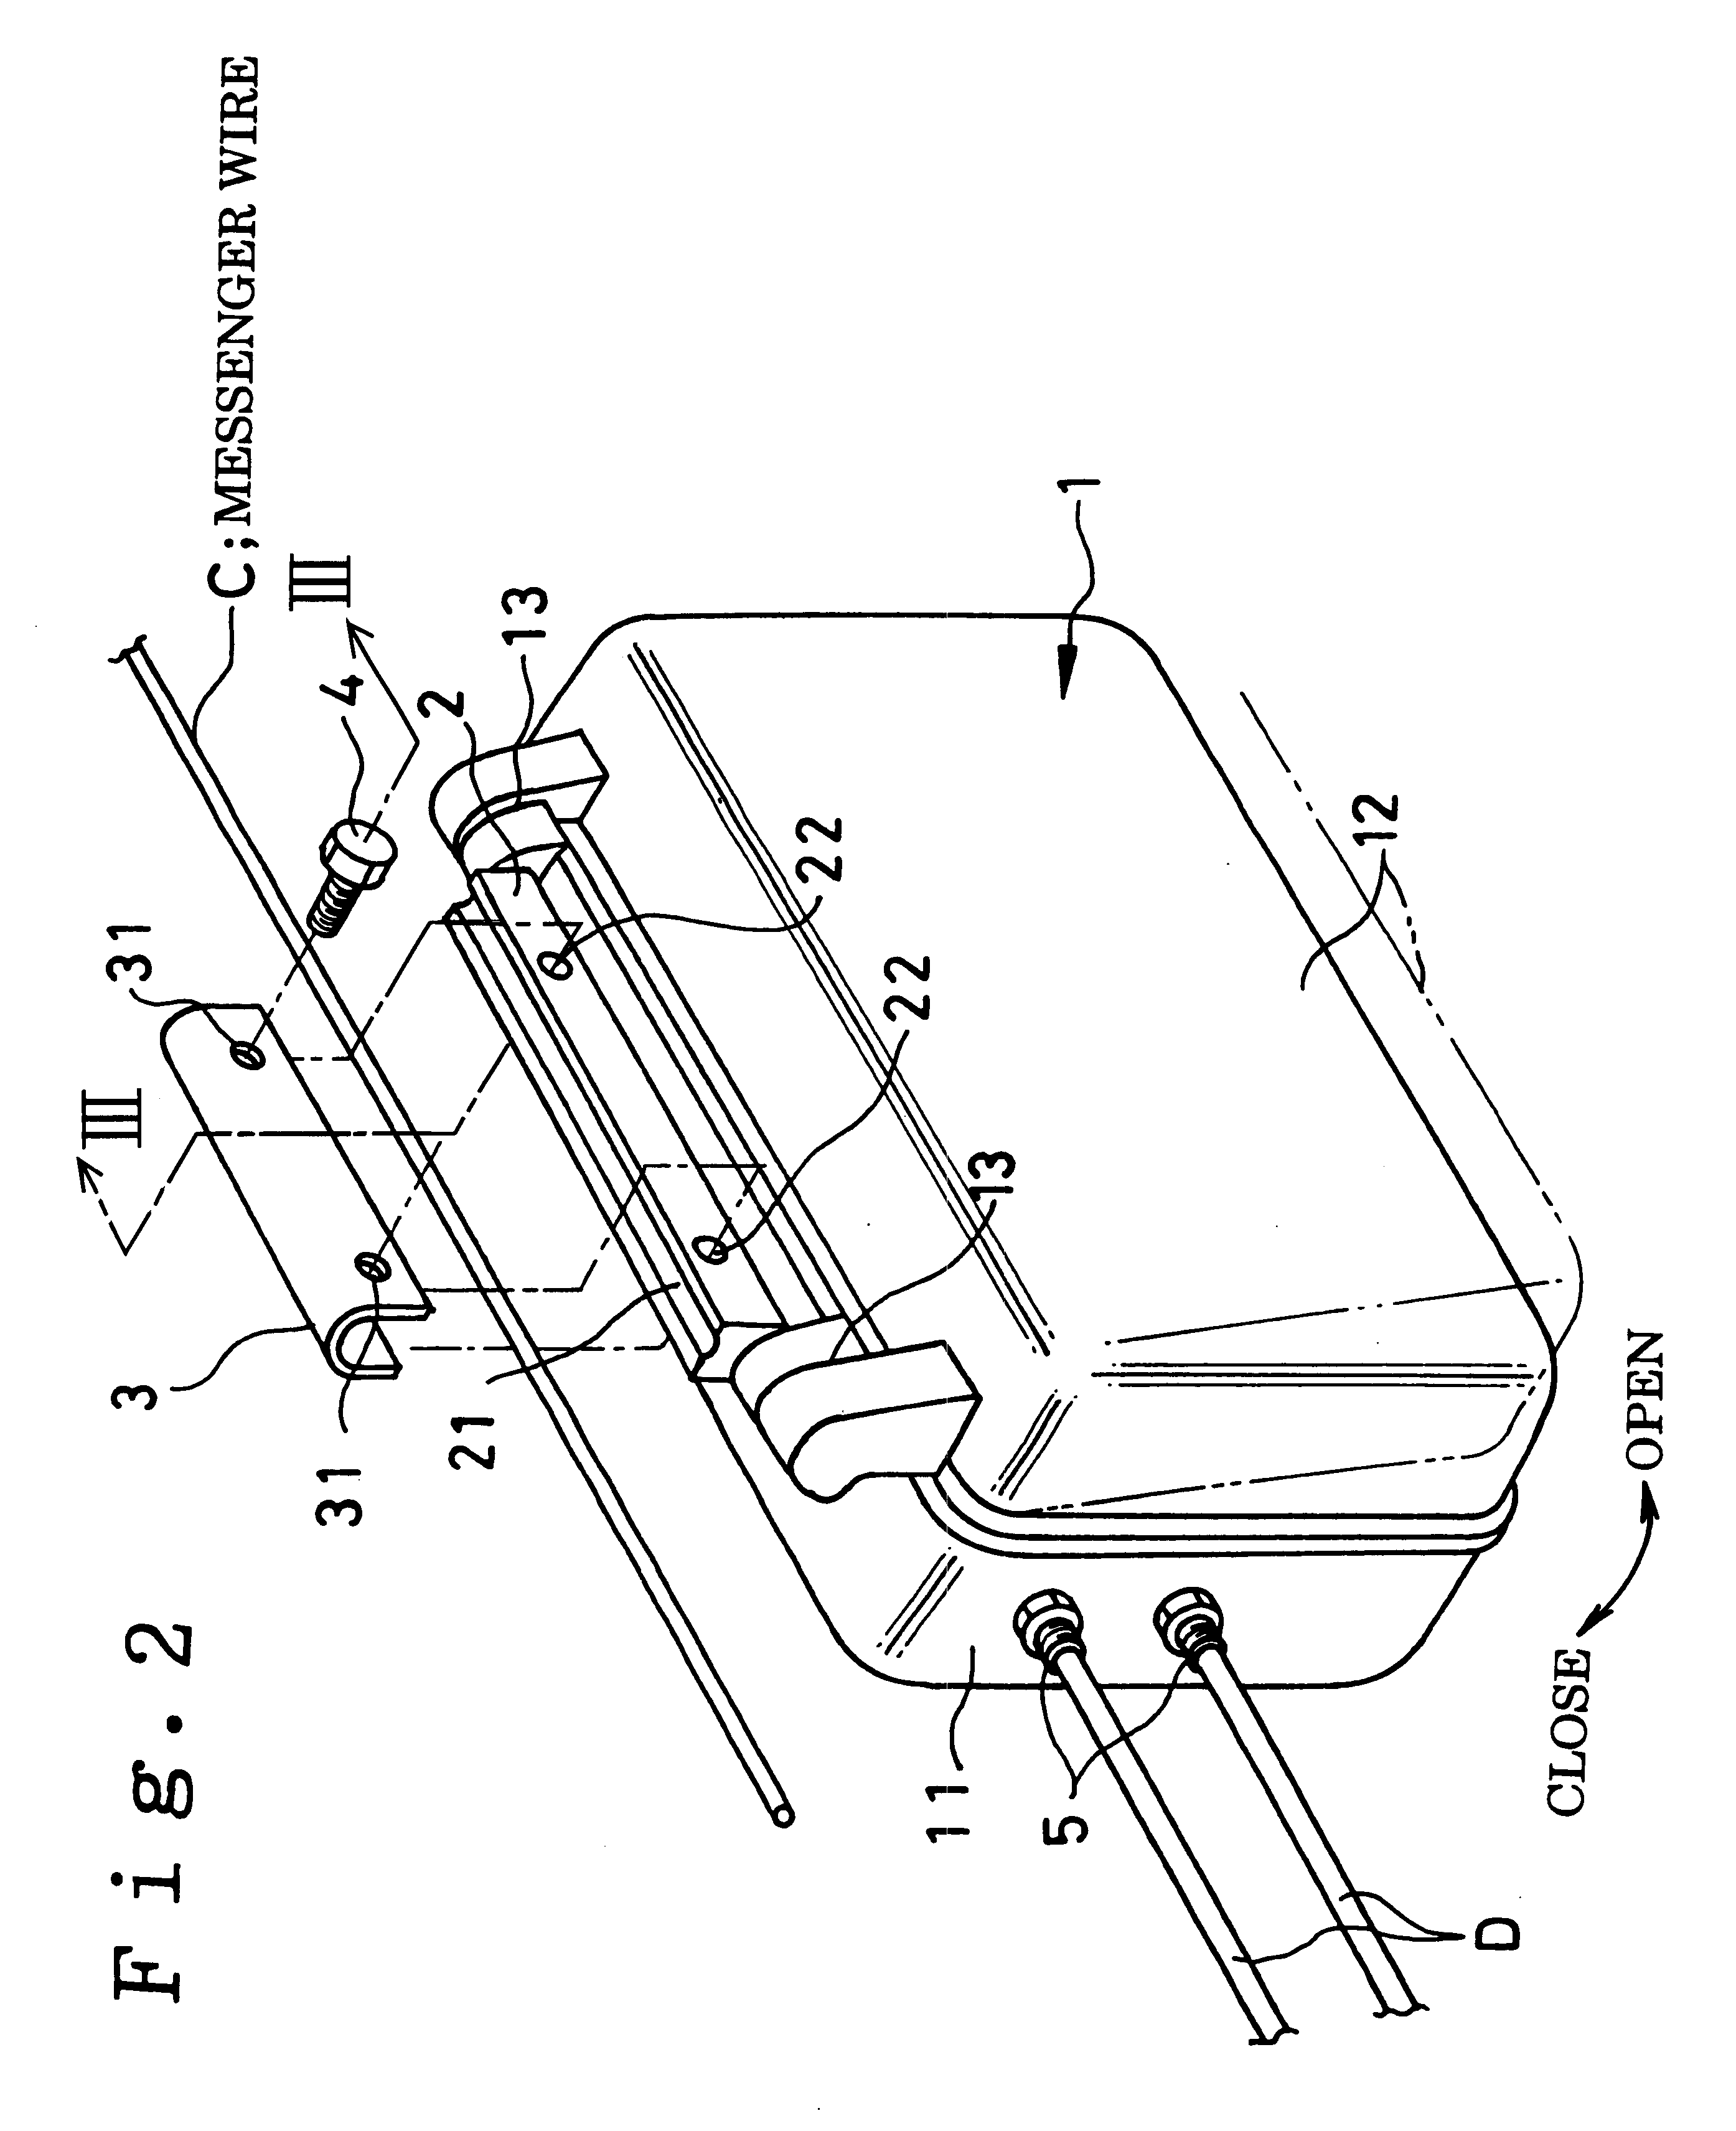 Casing structure of communication equipment